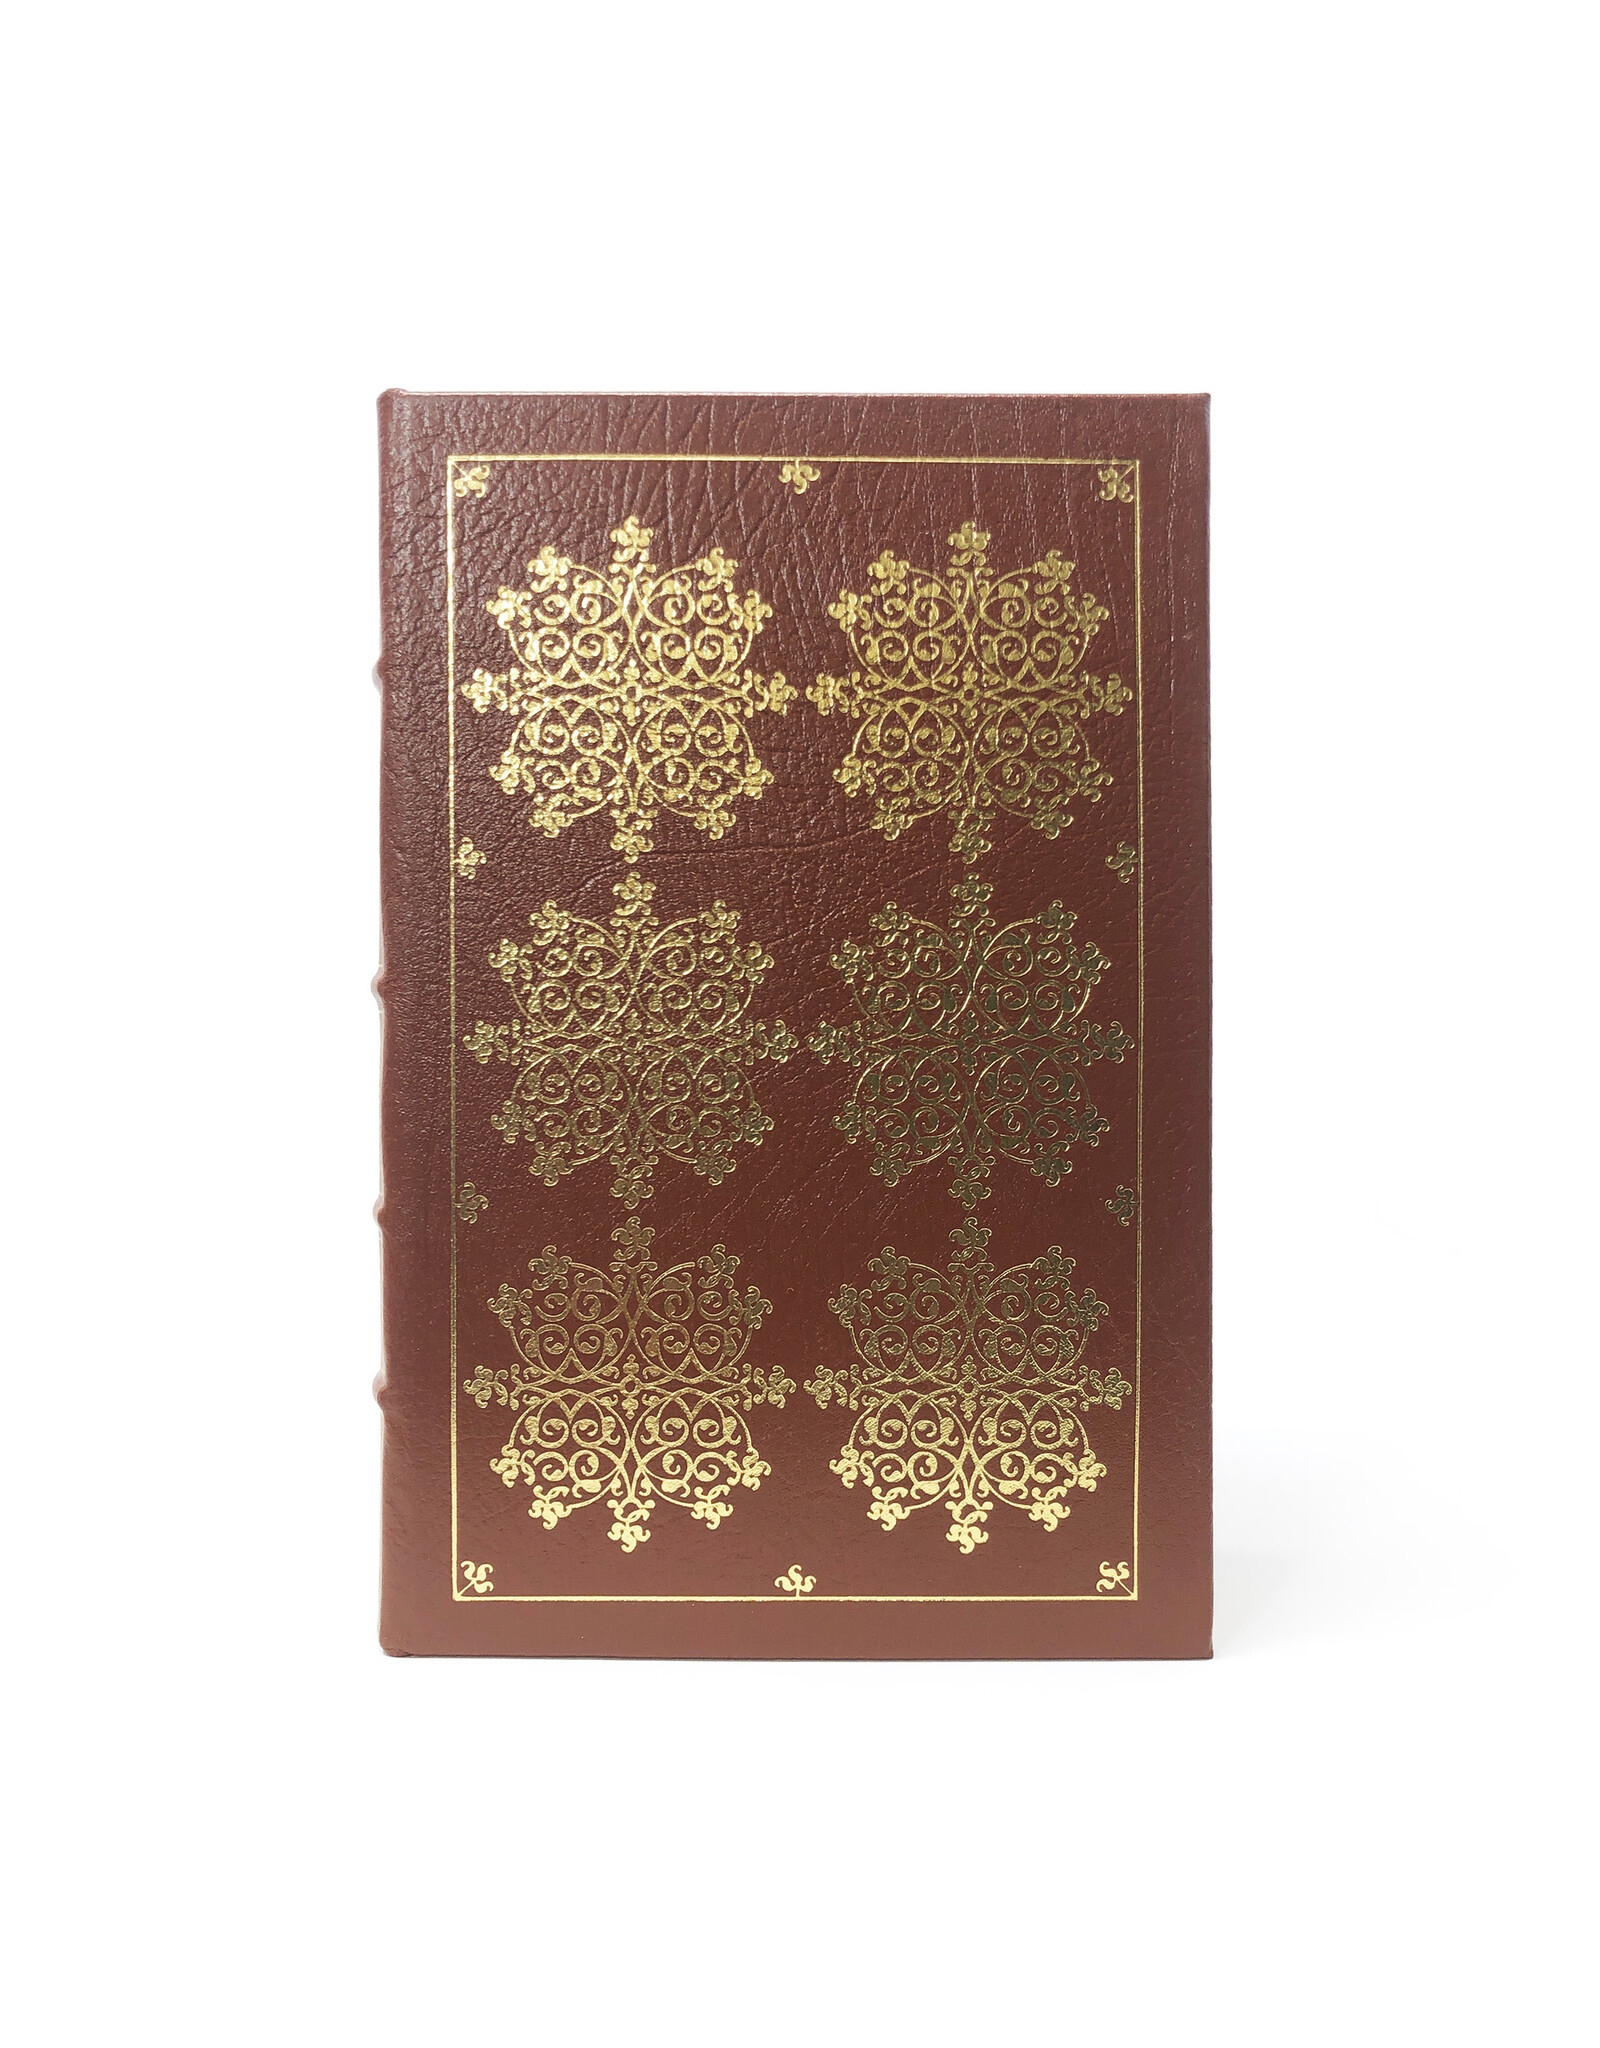 Easton Press Mill on the Floss 100 Greatest Books Ever Written Genuine Leather Collector's Edition